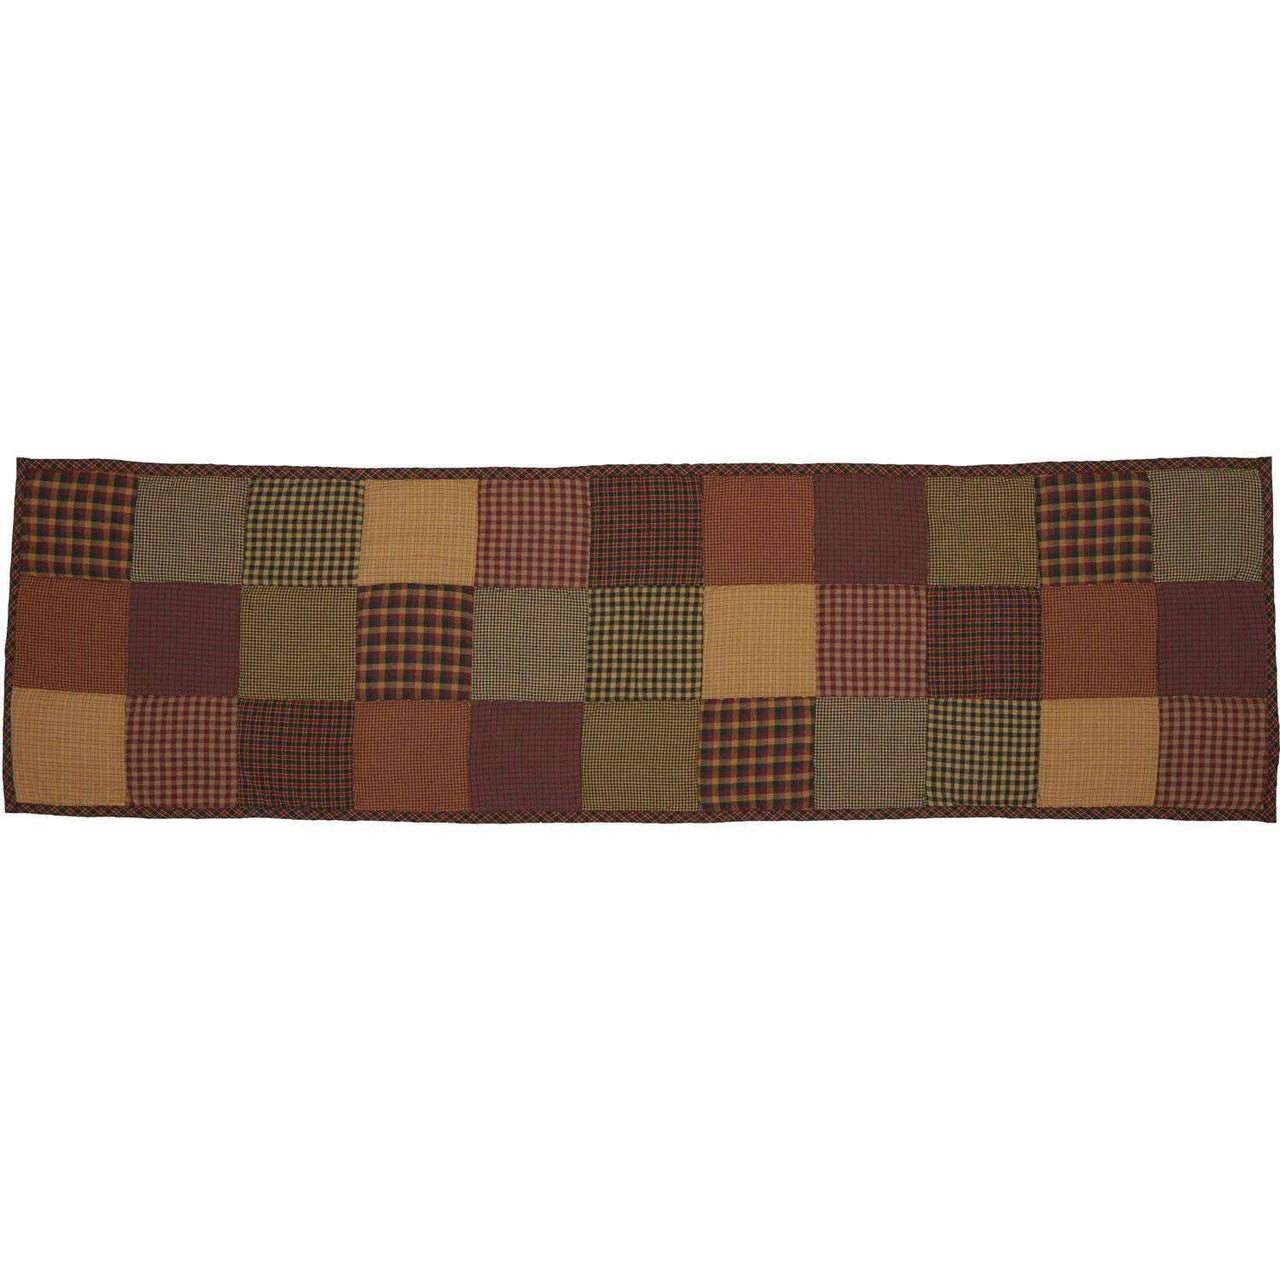 Heritage Farms Quilted Runner 13x48 VHC Brands - The Fox Decor